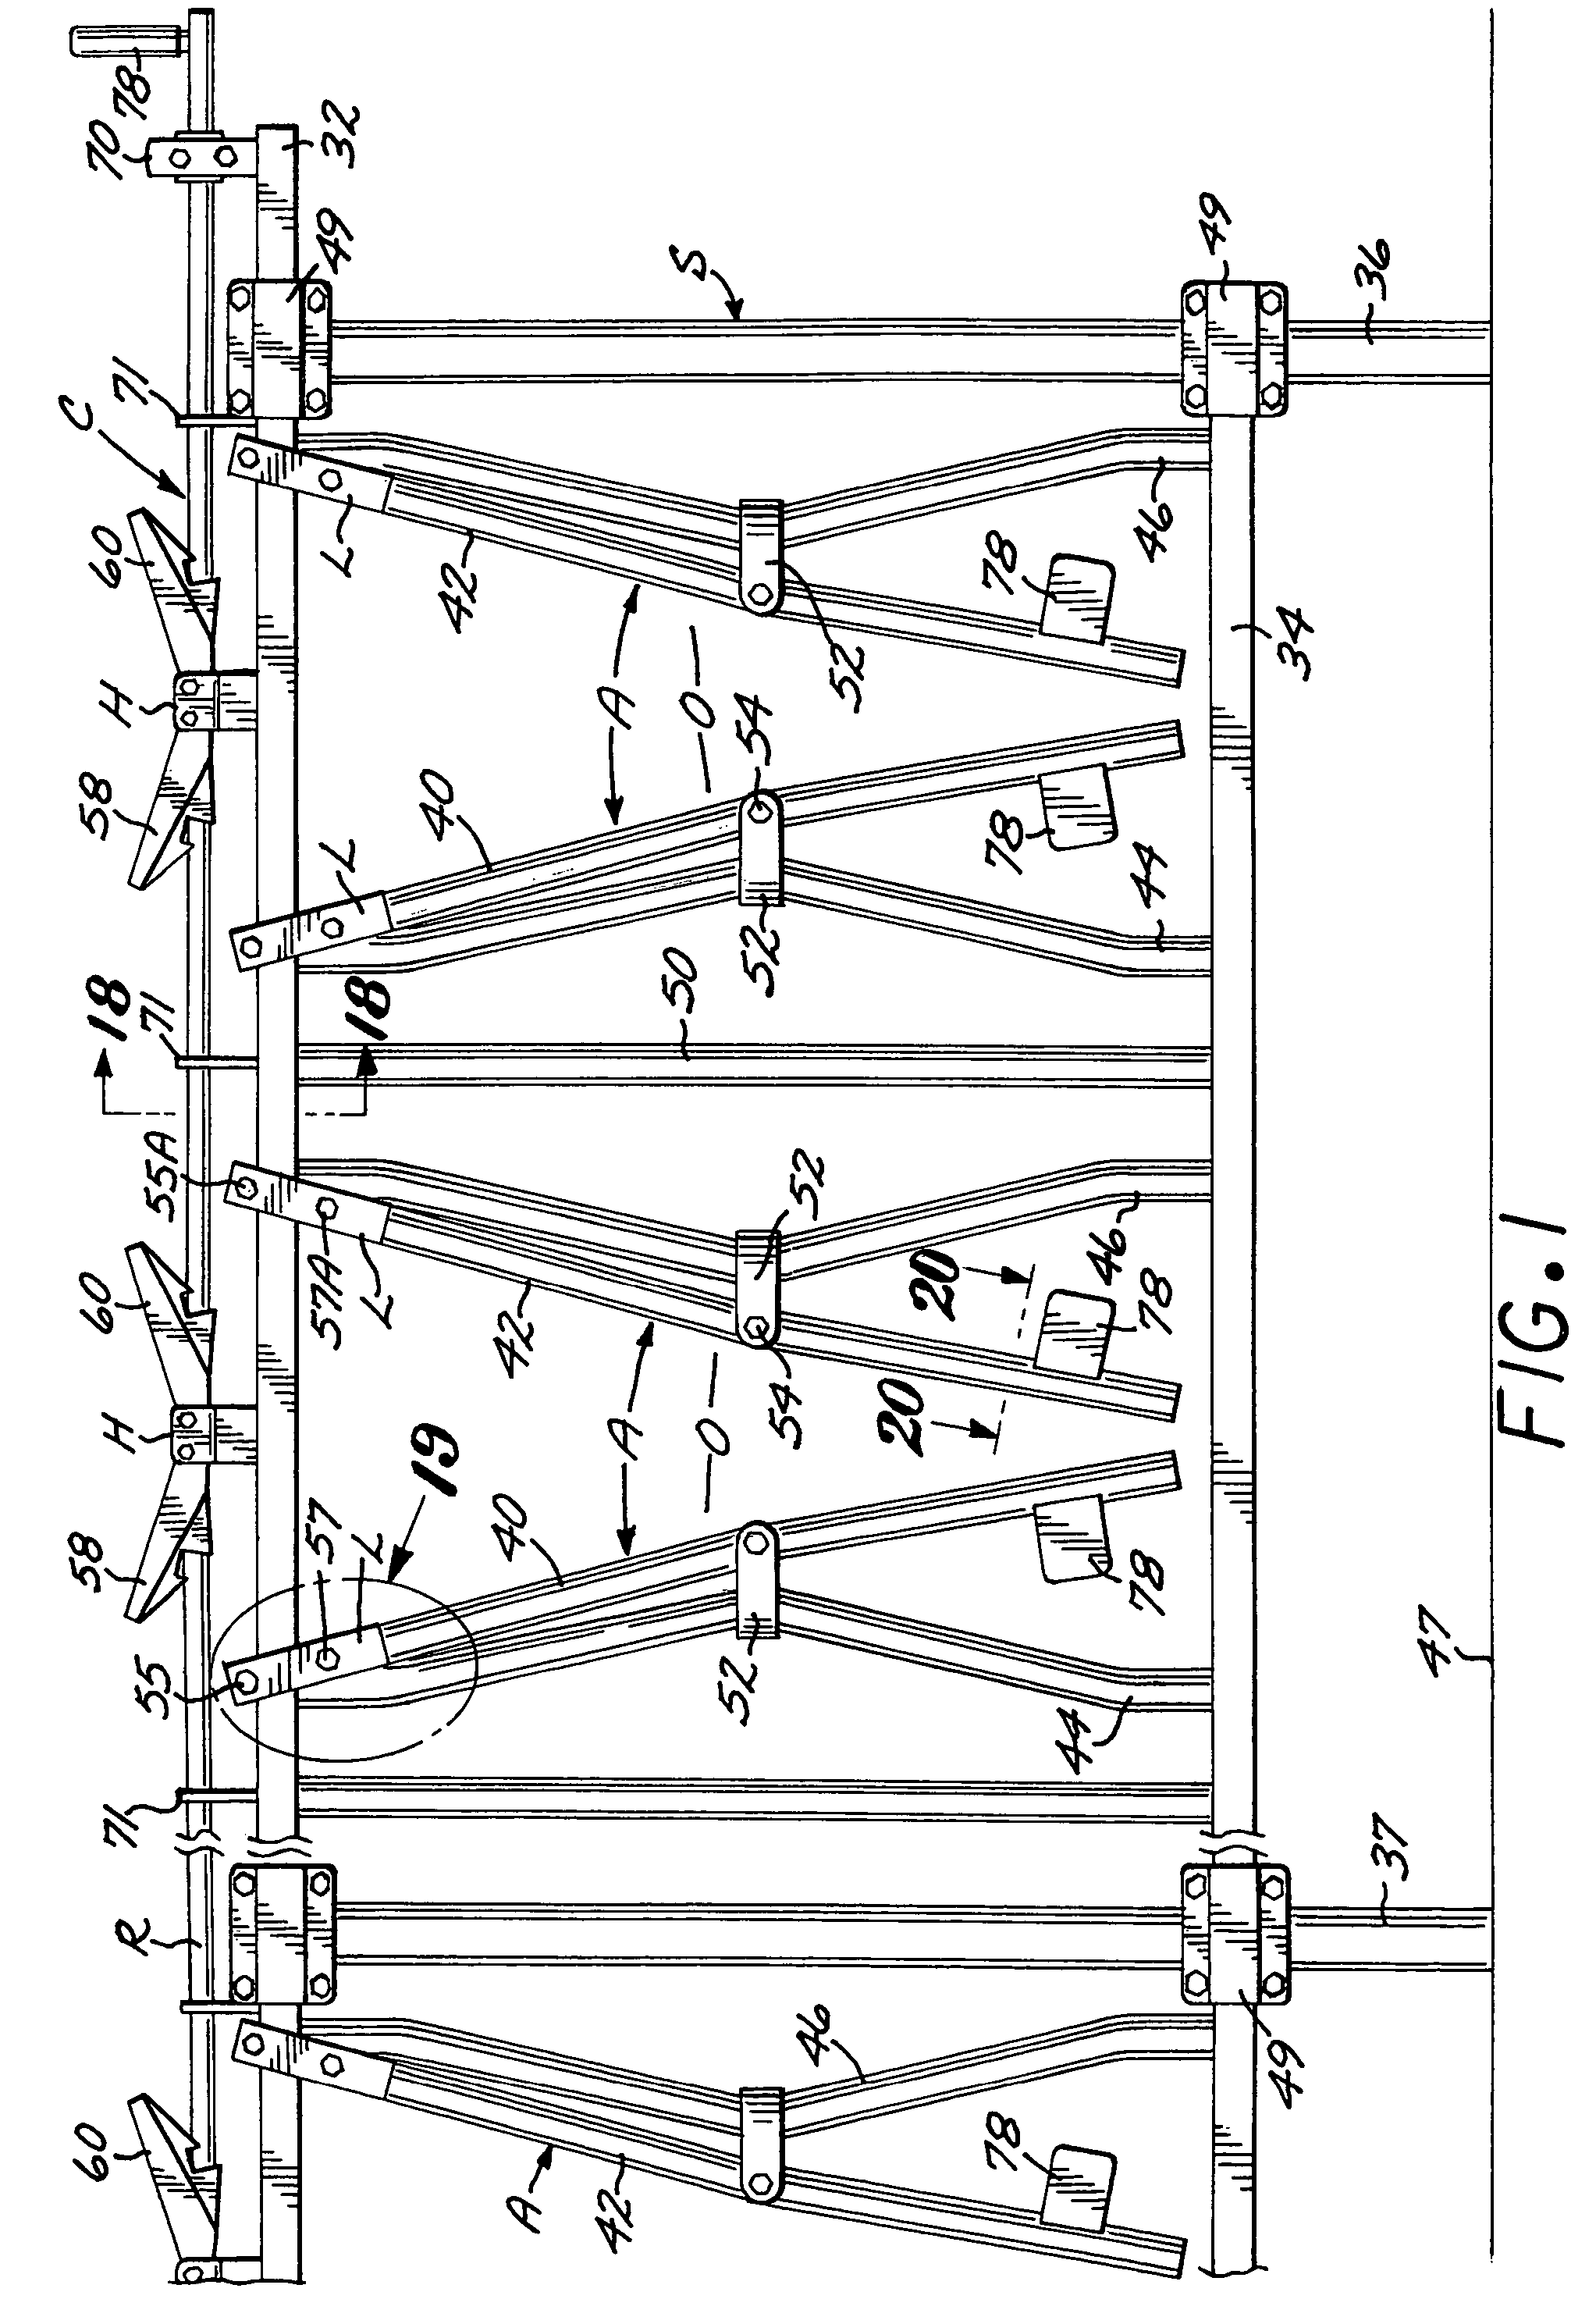 Double-release bar for a cow stanchion apparatus